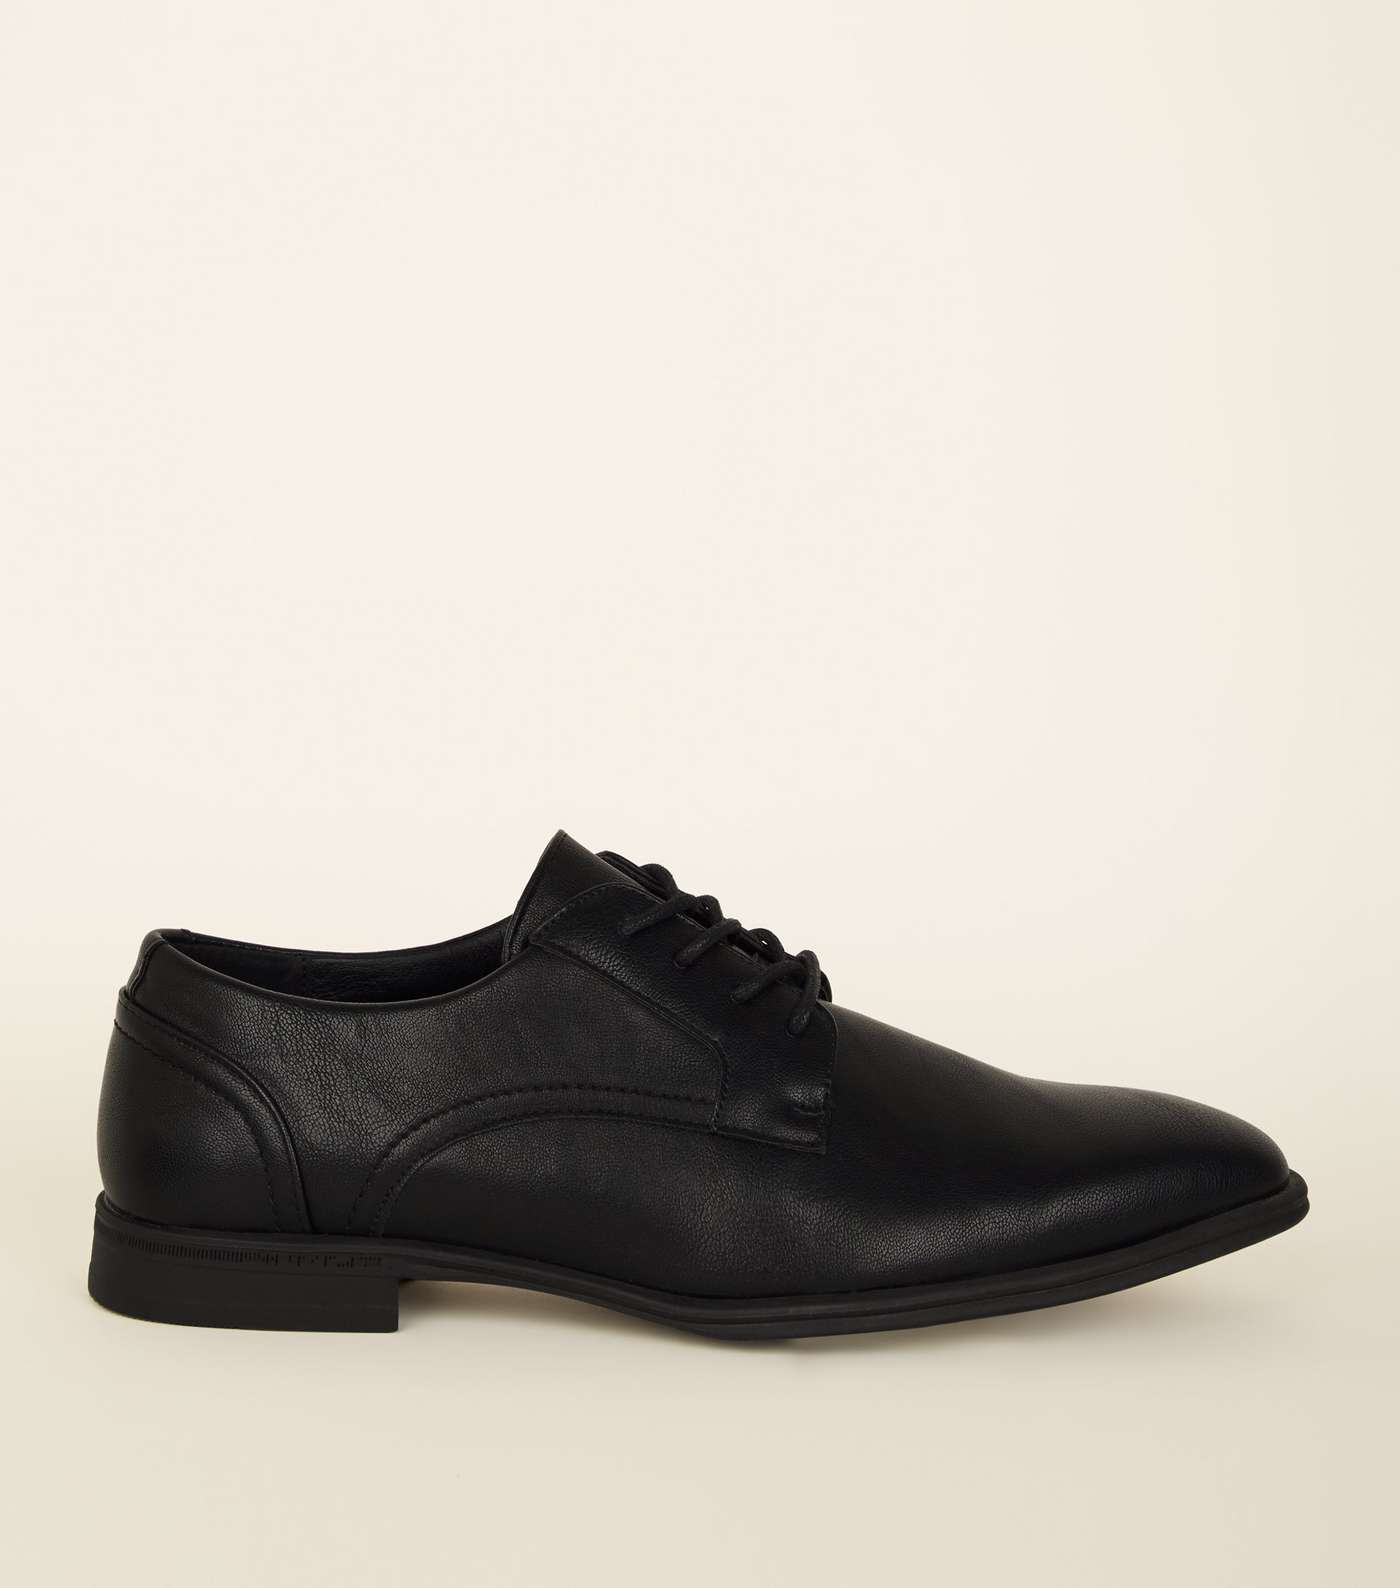 Black Leather-Look Formal Shoes Image 2